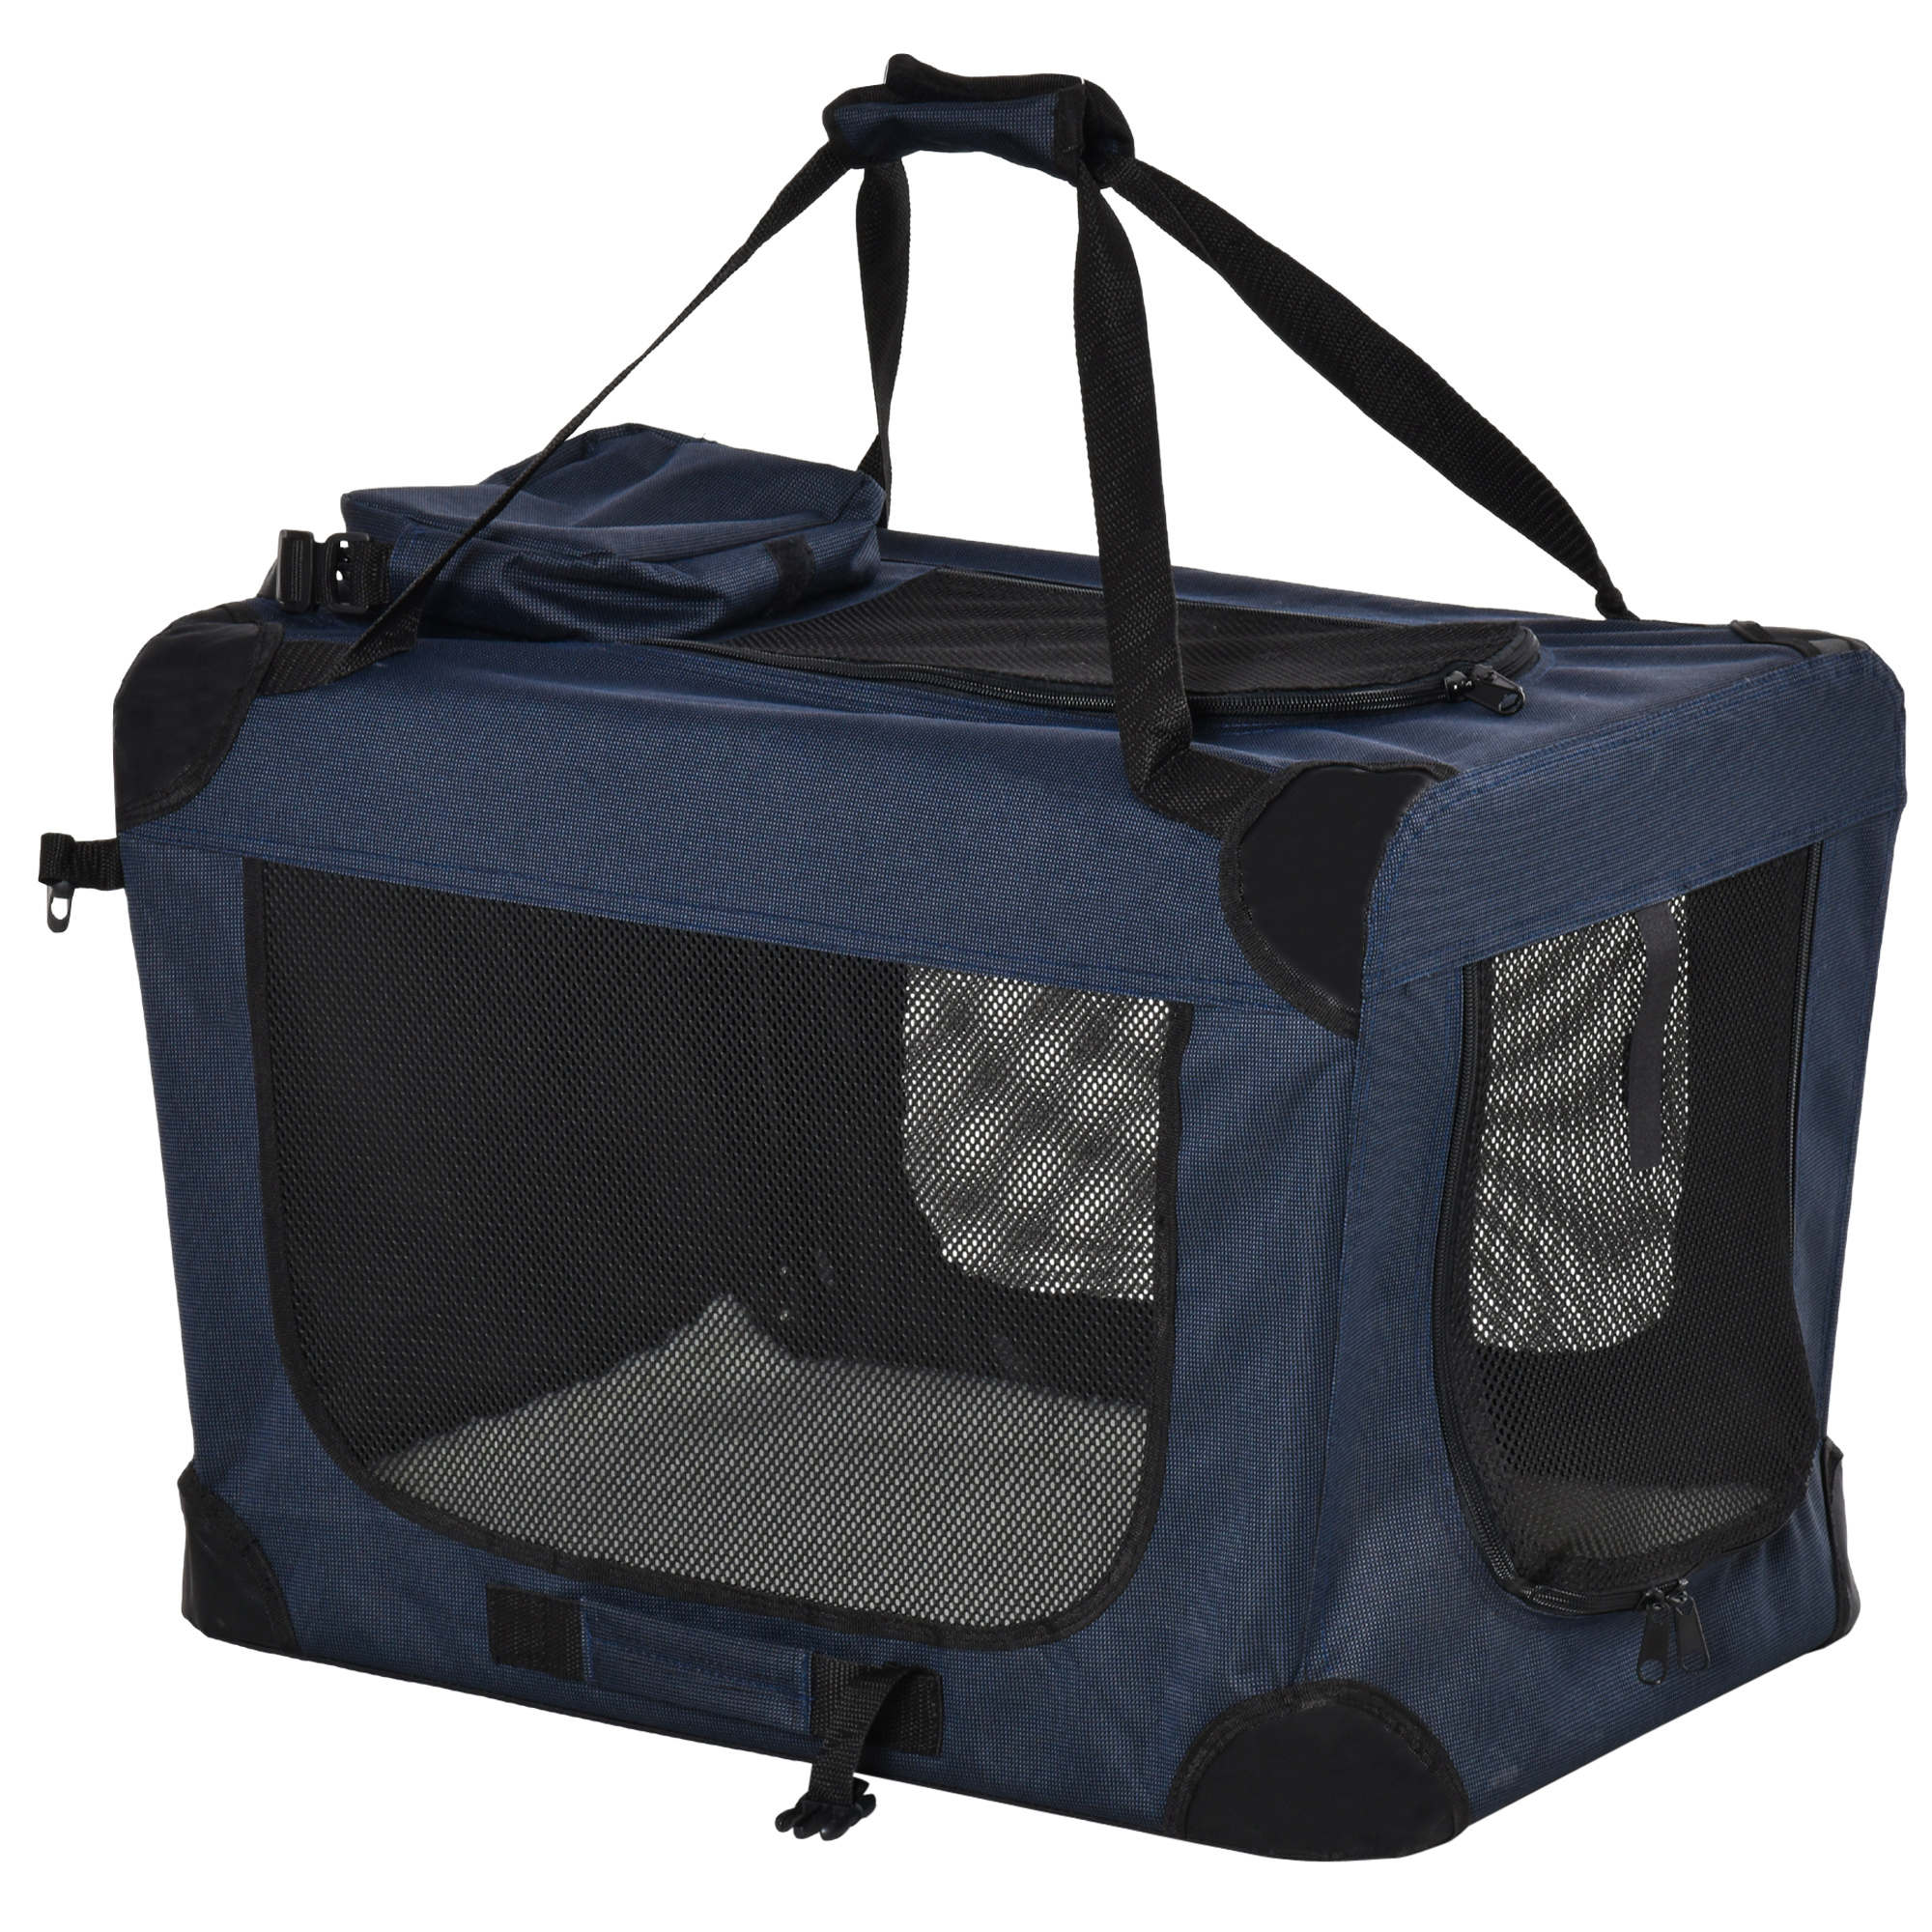 Image of PawHut Soft Pet Crate, Folding Dog Carrier Bag with Cushion, Durable Cat Carrier, 70 x 51 x 50 cm, Dark Blue